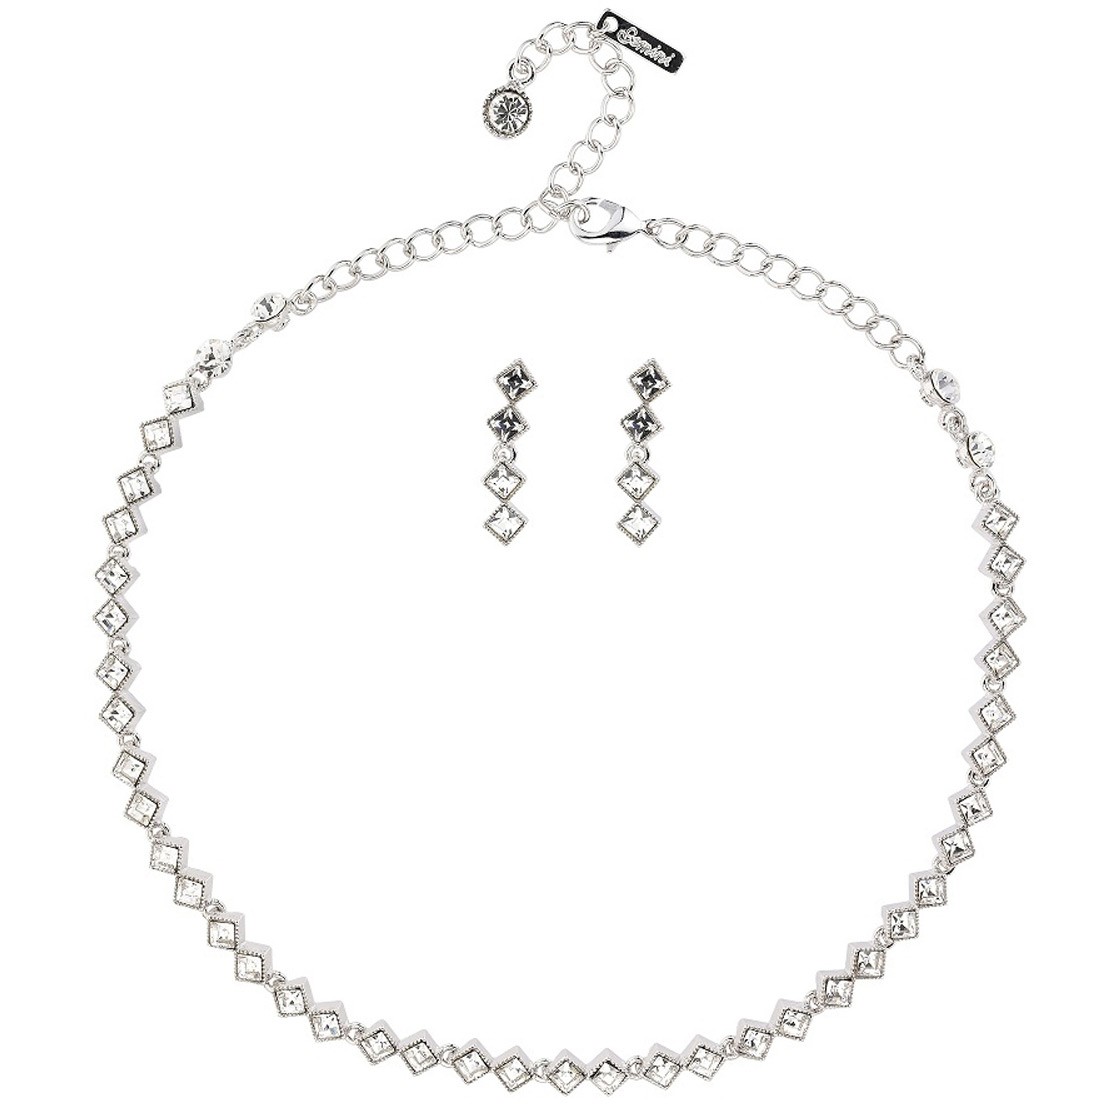 nacionalismo Activar Conexión Swarovski Crystal Clear Crystal Jewellery Set - Square Rows of Clear White  Diamond Swarovski Crystals, Rhodium Plated. Necklaces, Earrings, Bracelets  and Hairpieces